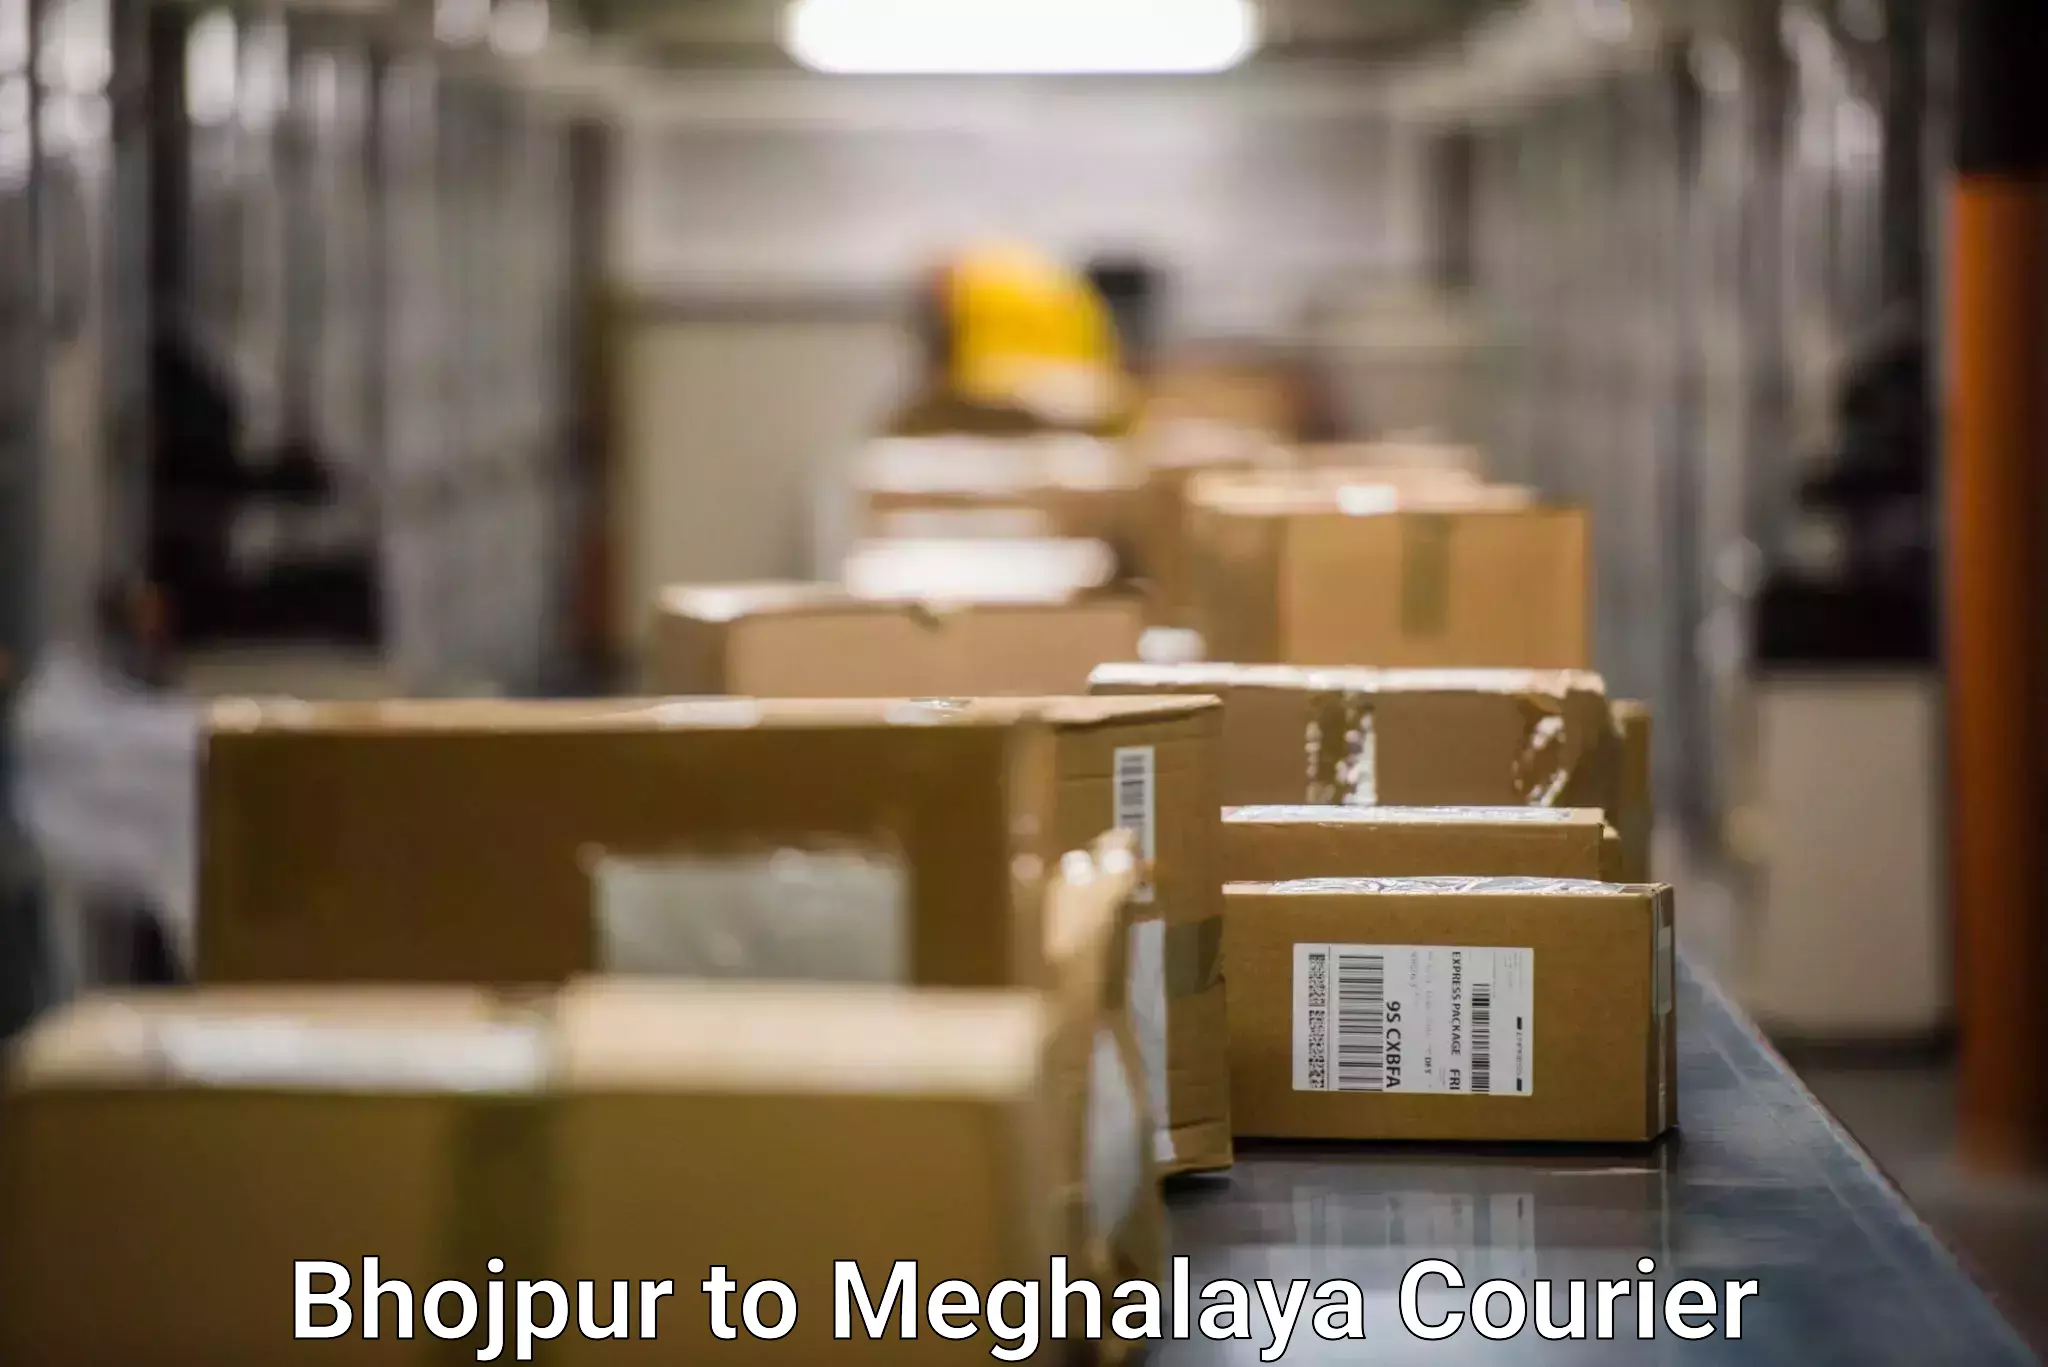 Courier service innovation Bhojpur to Nongpoh